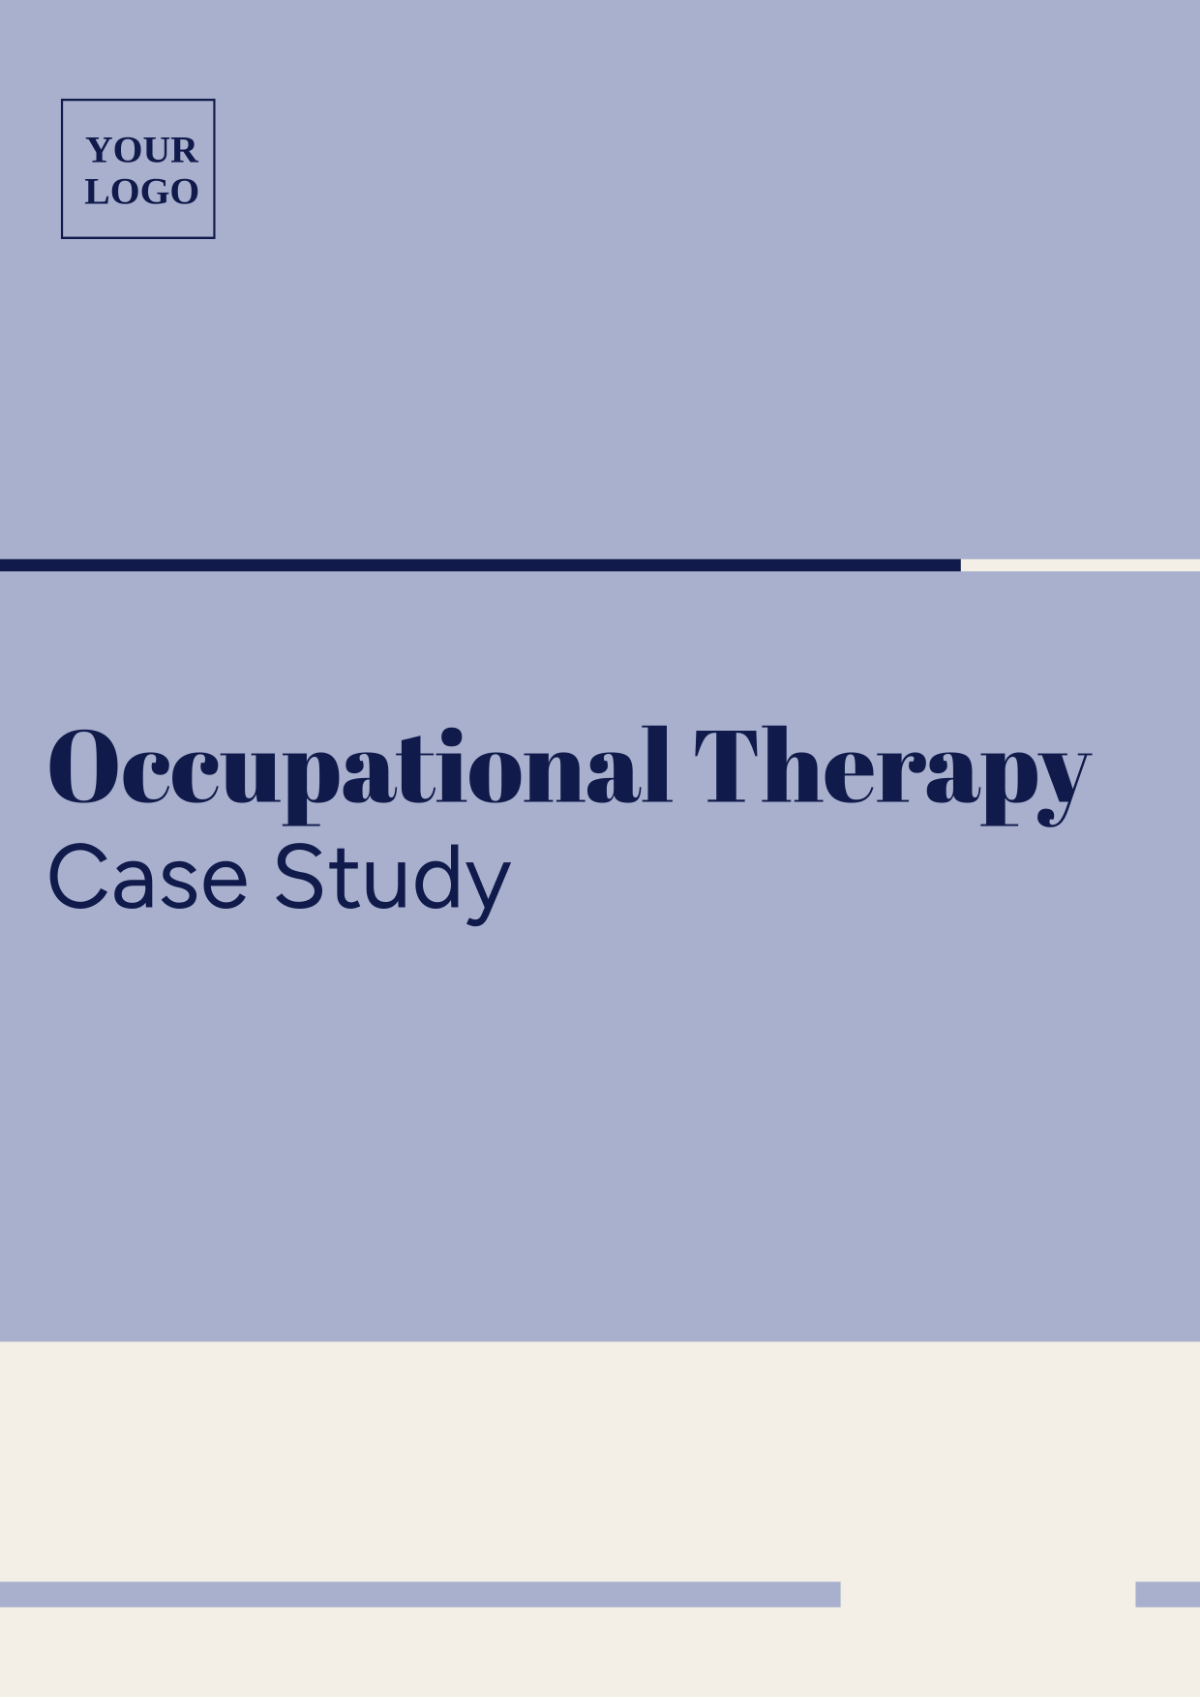 Occupational Therapy Case Study Template